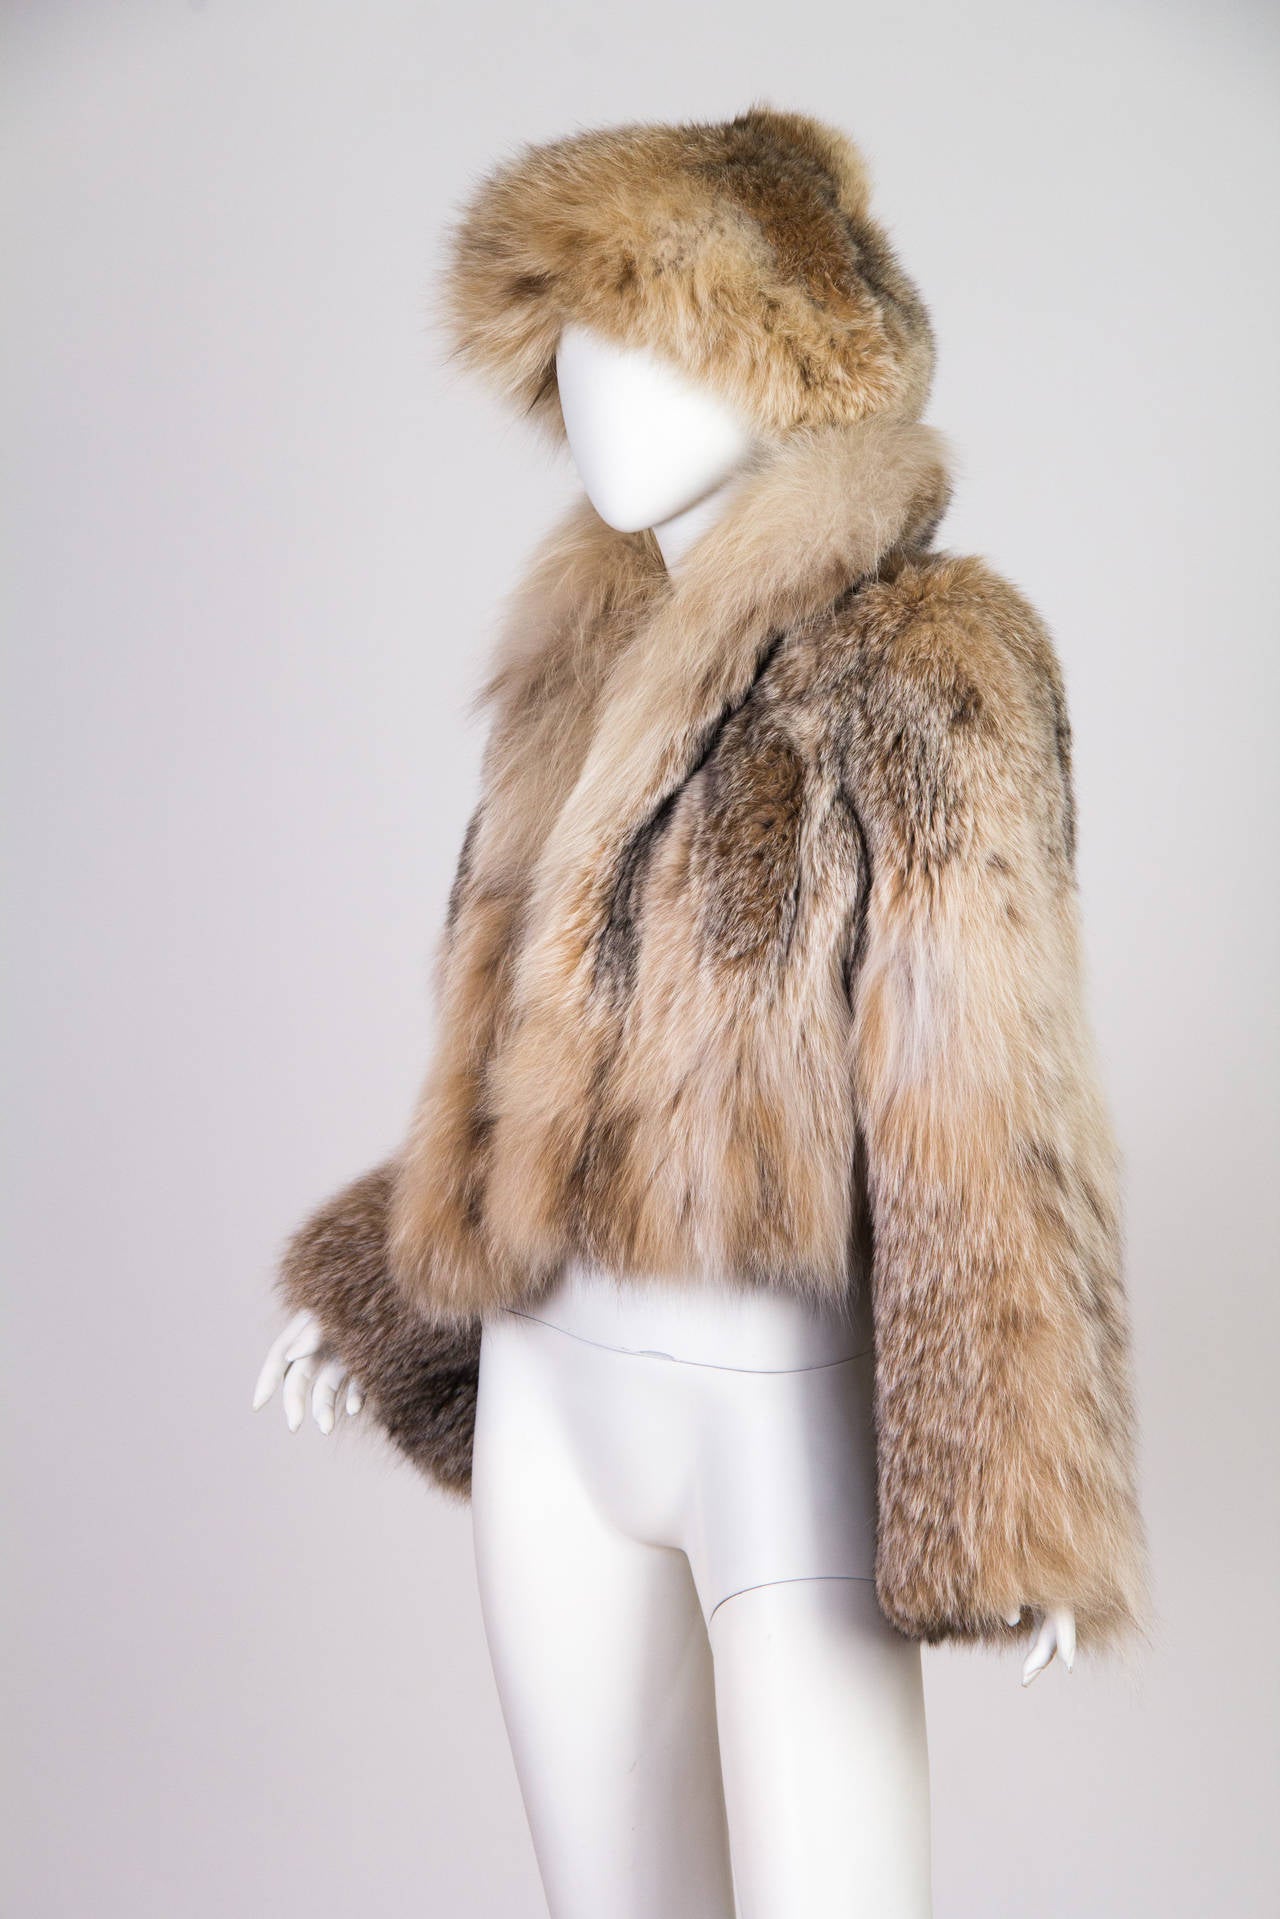 This is a beautiful fur jacket and hat set by Adolfo II for Saks Fifth Avenue. The full collar on the jacket takes full advantage of the wonderfully plush cream and ruddy brown fur, and the symmetry in the placement of the fur patterns shows the